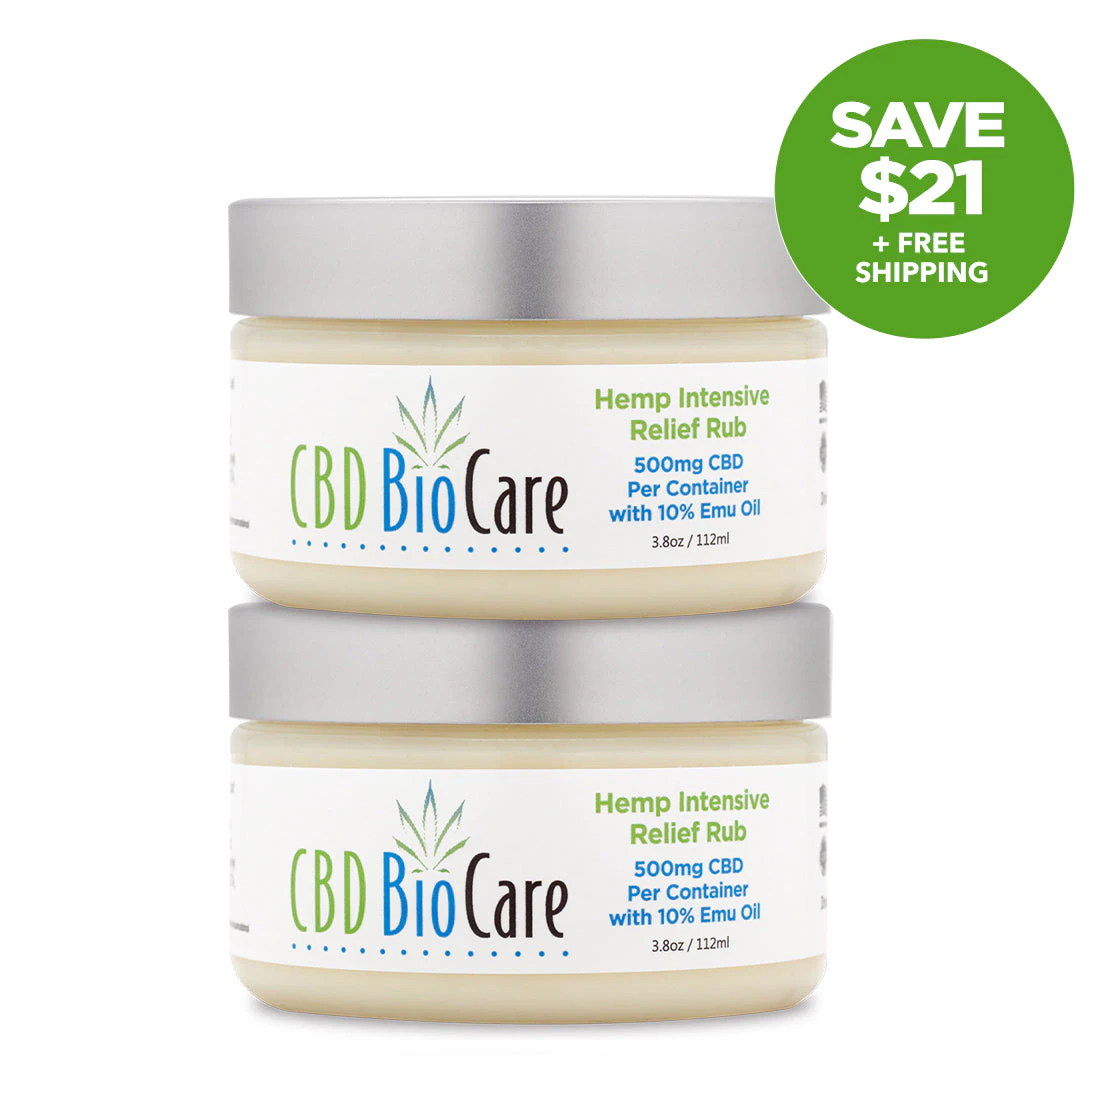 500mg All Natural CBD Pain Relief Balm Two Pack from CBD BioCare